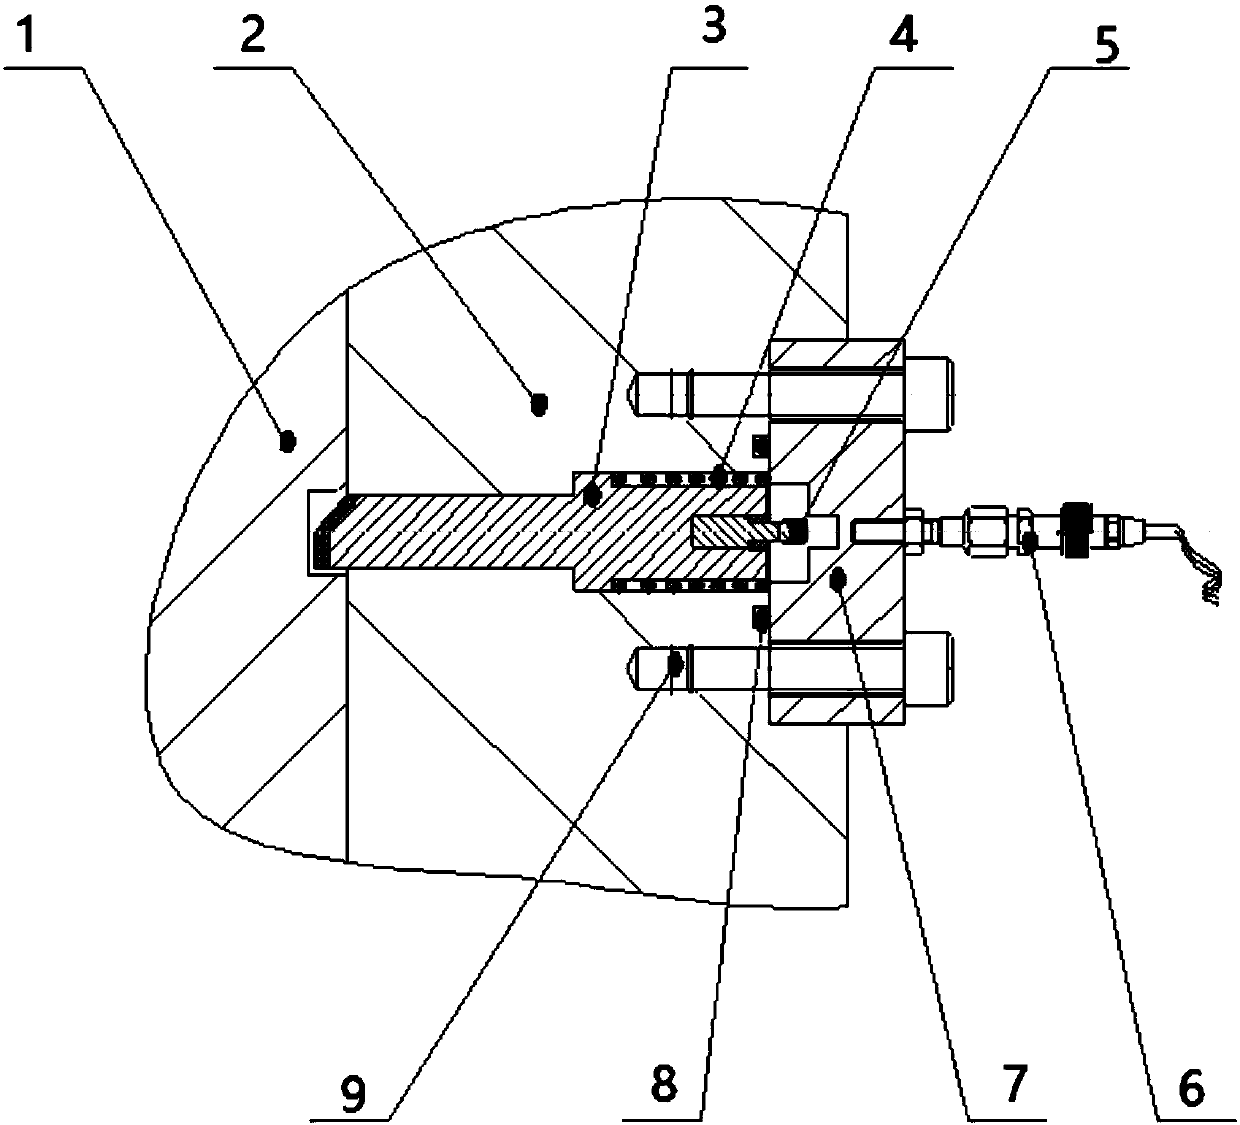 Non-contact type valve position indicating mechanism